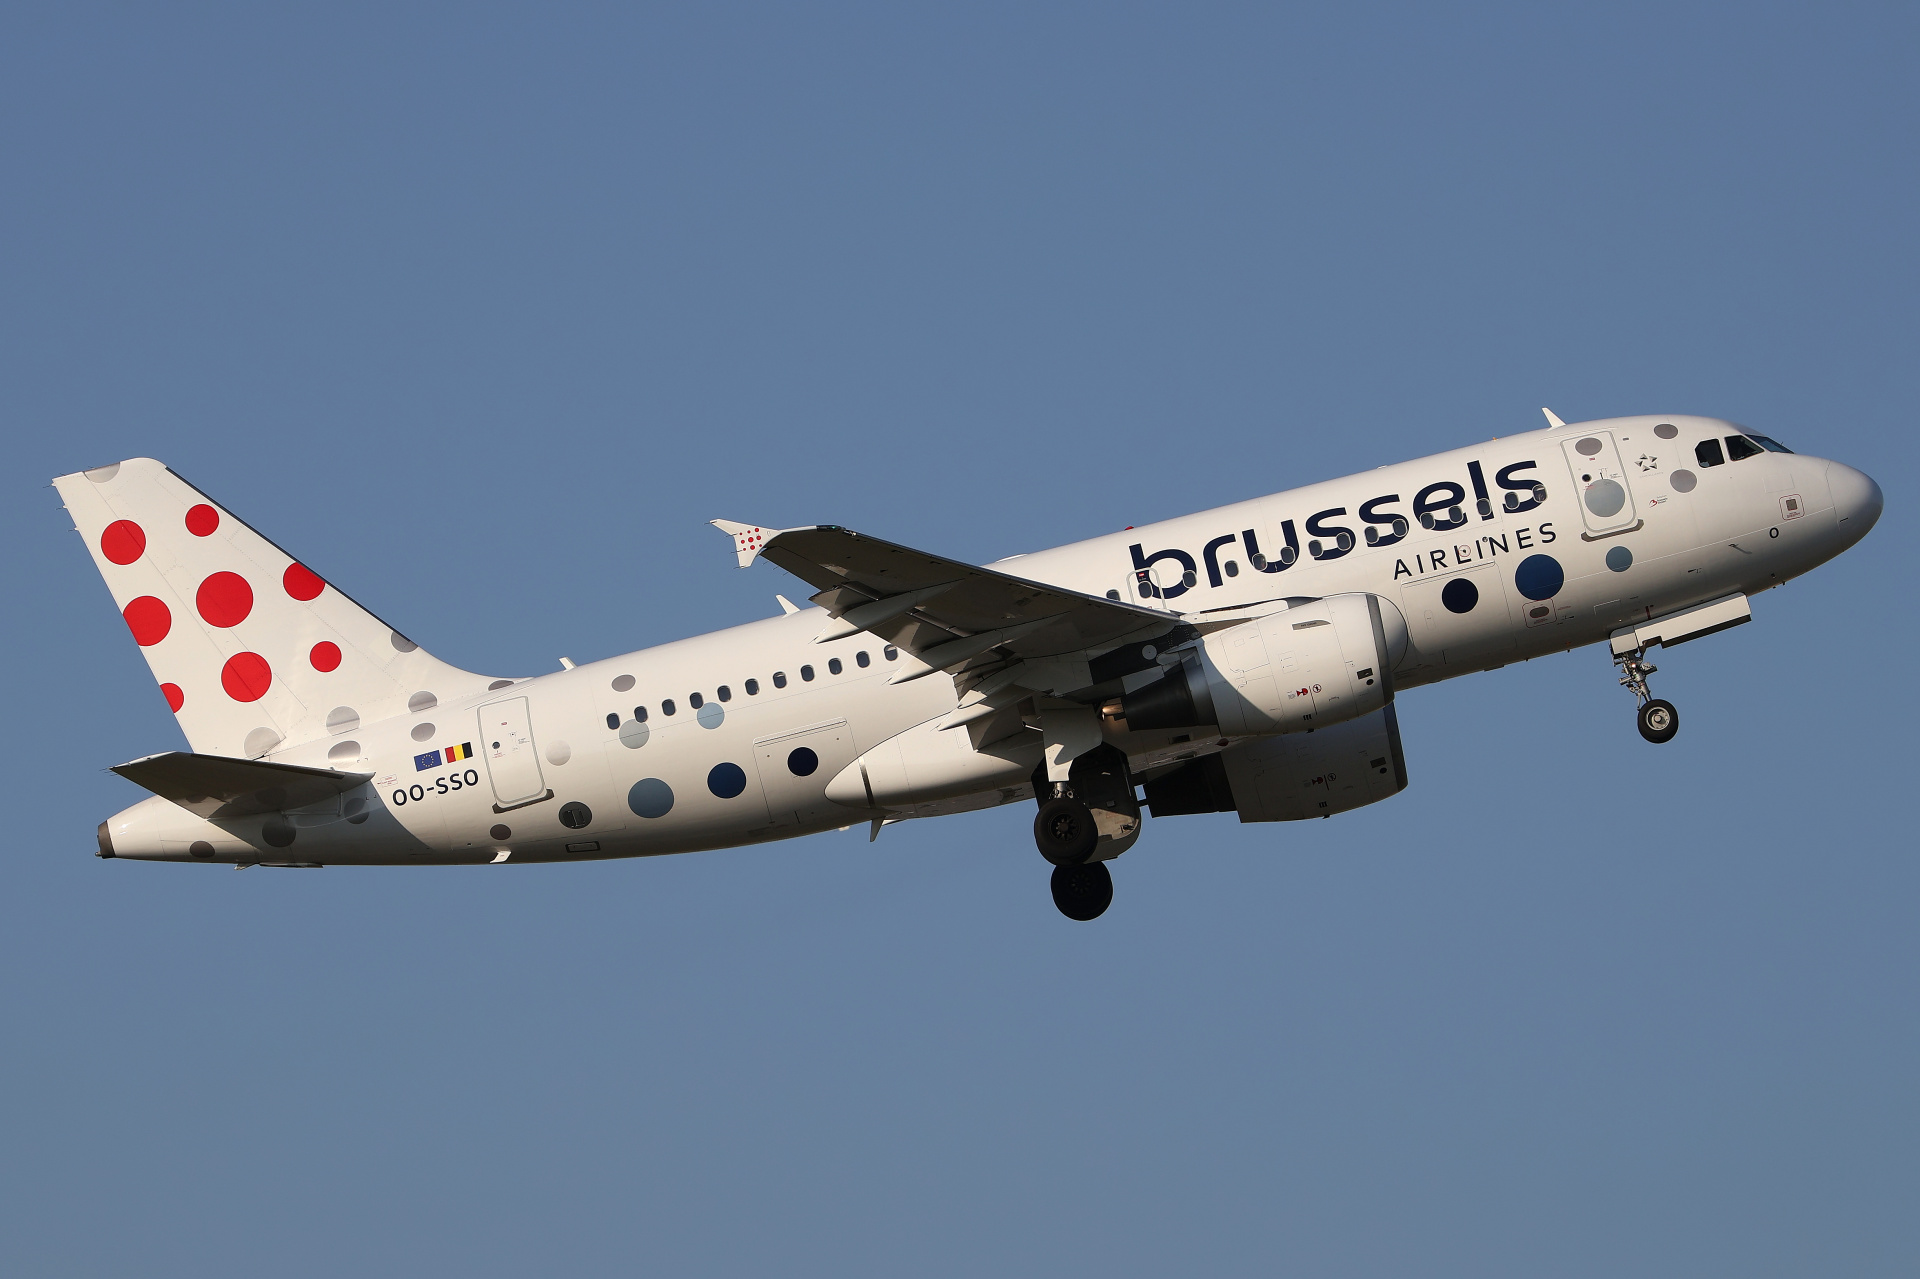 OO-SSO (Aircraft » EPWA Spotting » Airbus A319-100 » Brussels Airlines)